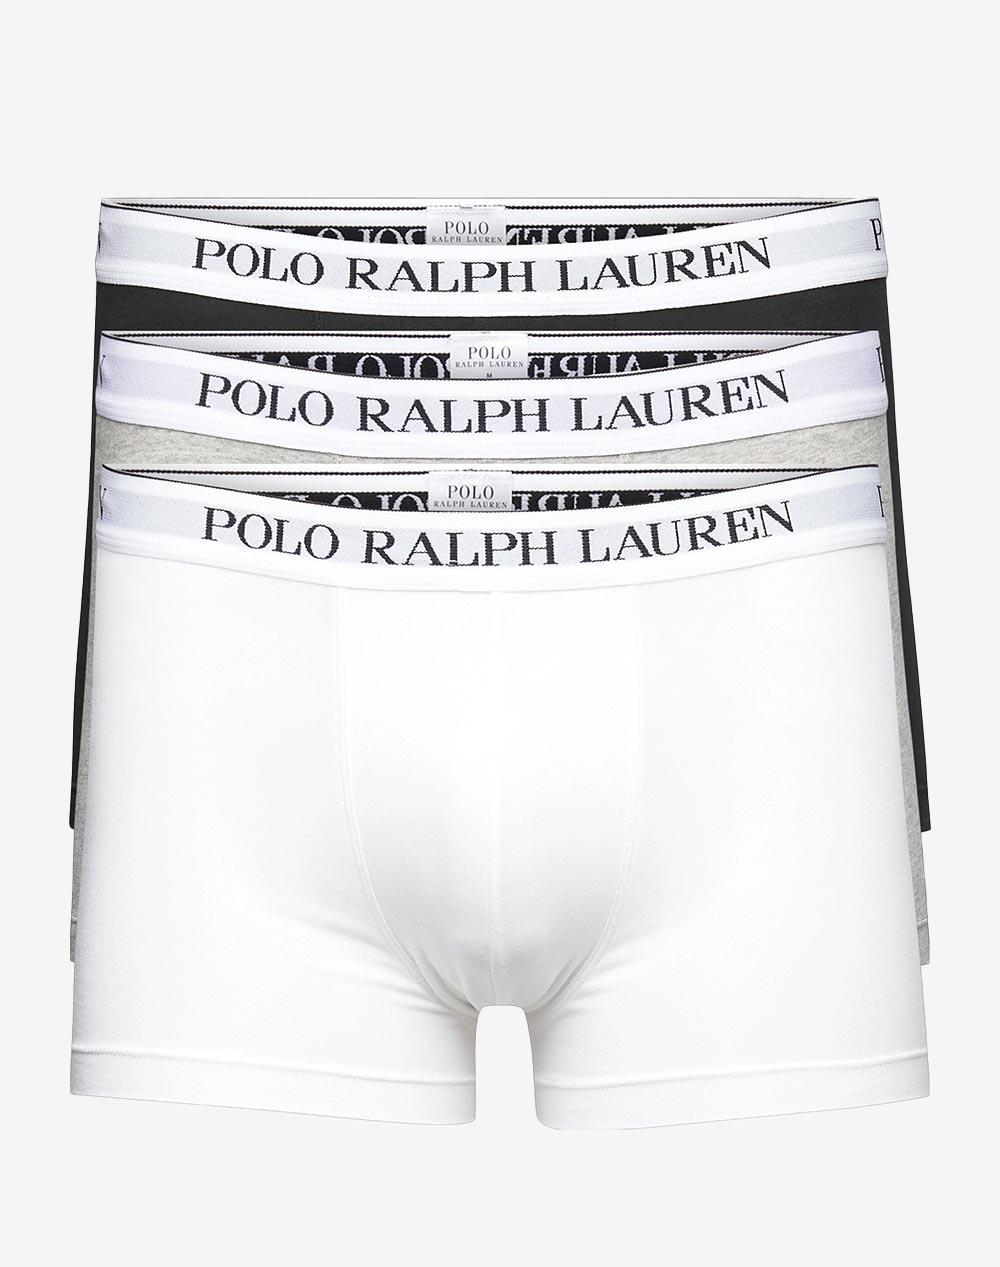 POLO RALPH LAUREN ΜΠΟΞΕΡ BCI CLSSIC TRUNK-3 PACK-TRUNK 714830299-052 White 0420APOLO1320009_XR25041